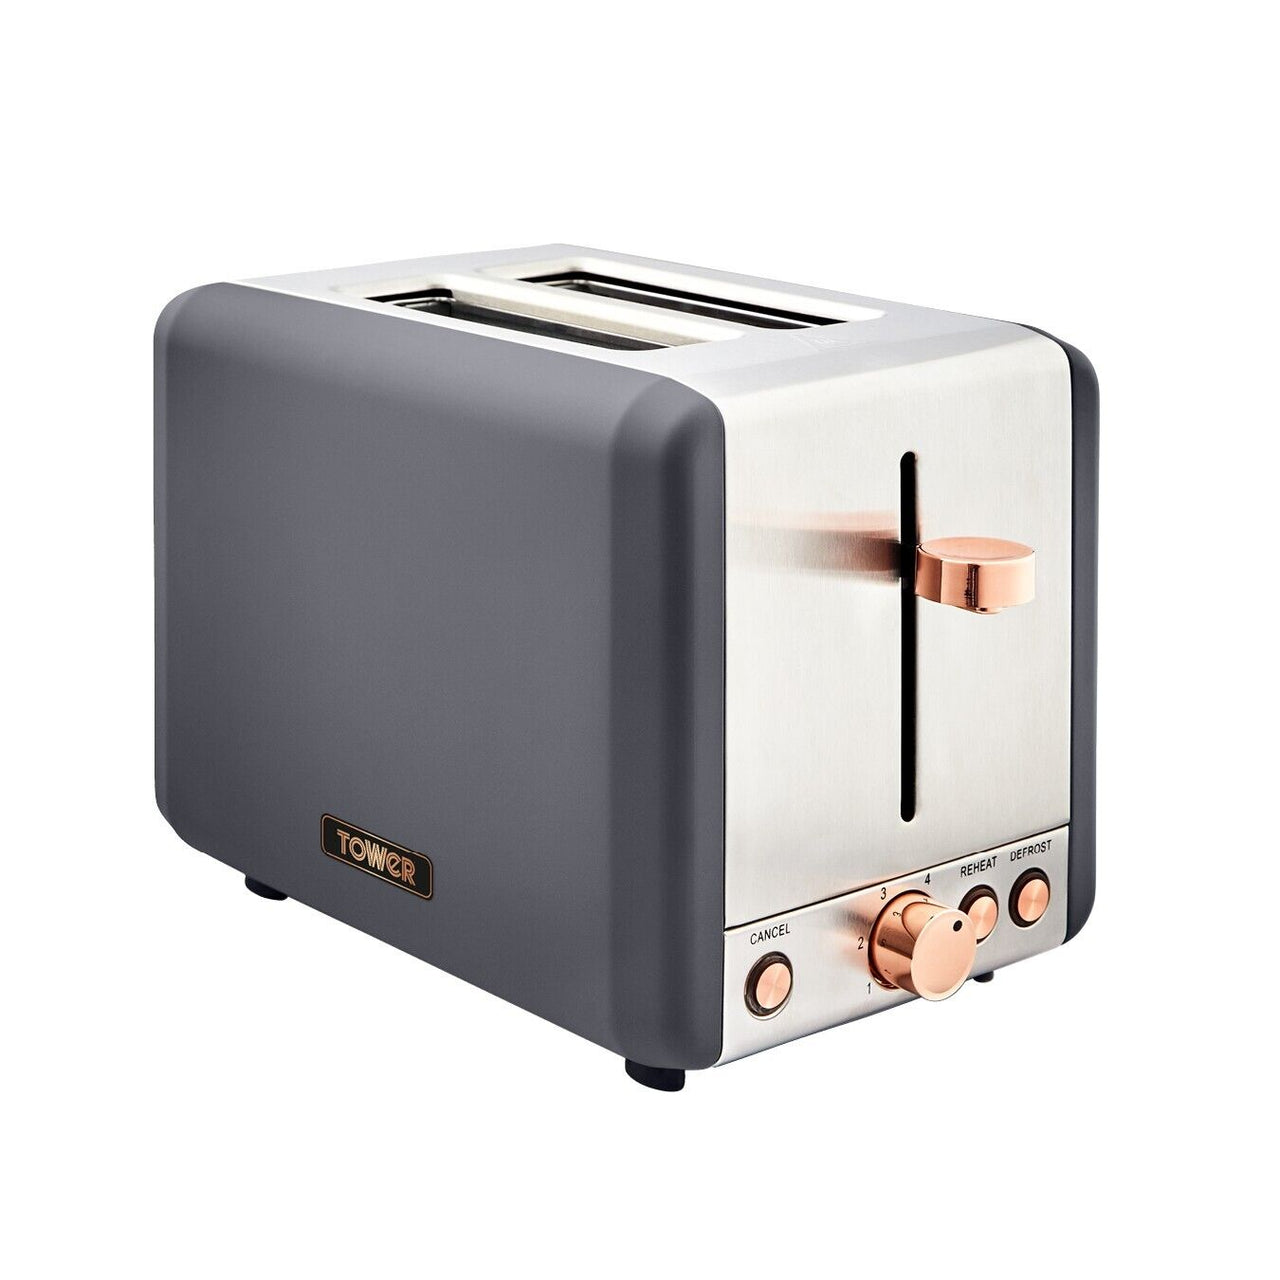 Tower Cavaletto T20036RGG 2 Slice Toaster in Grey & Rose Gold. 3 Year Guarantee